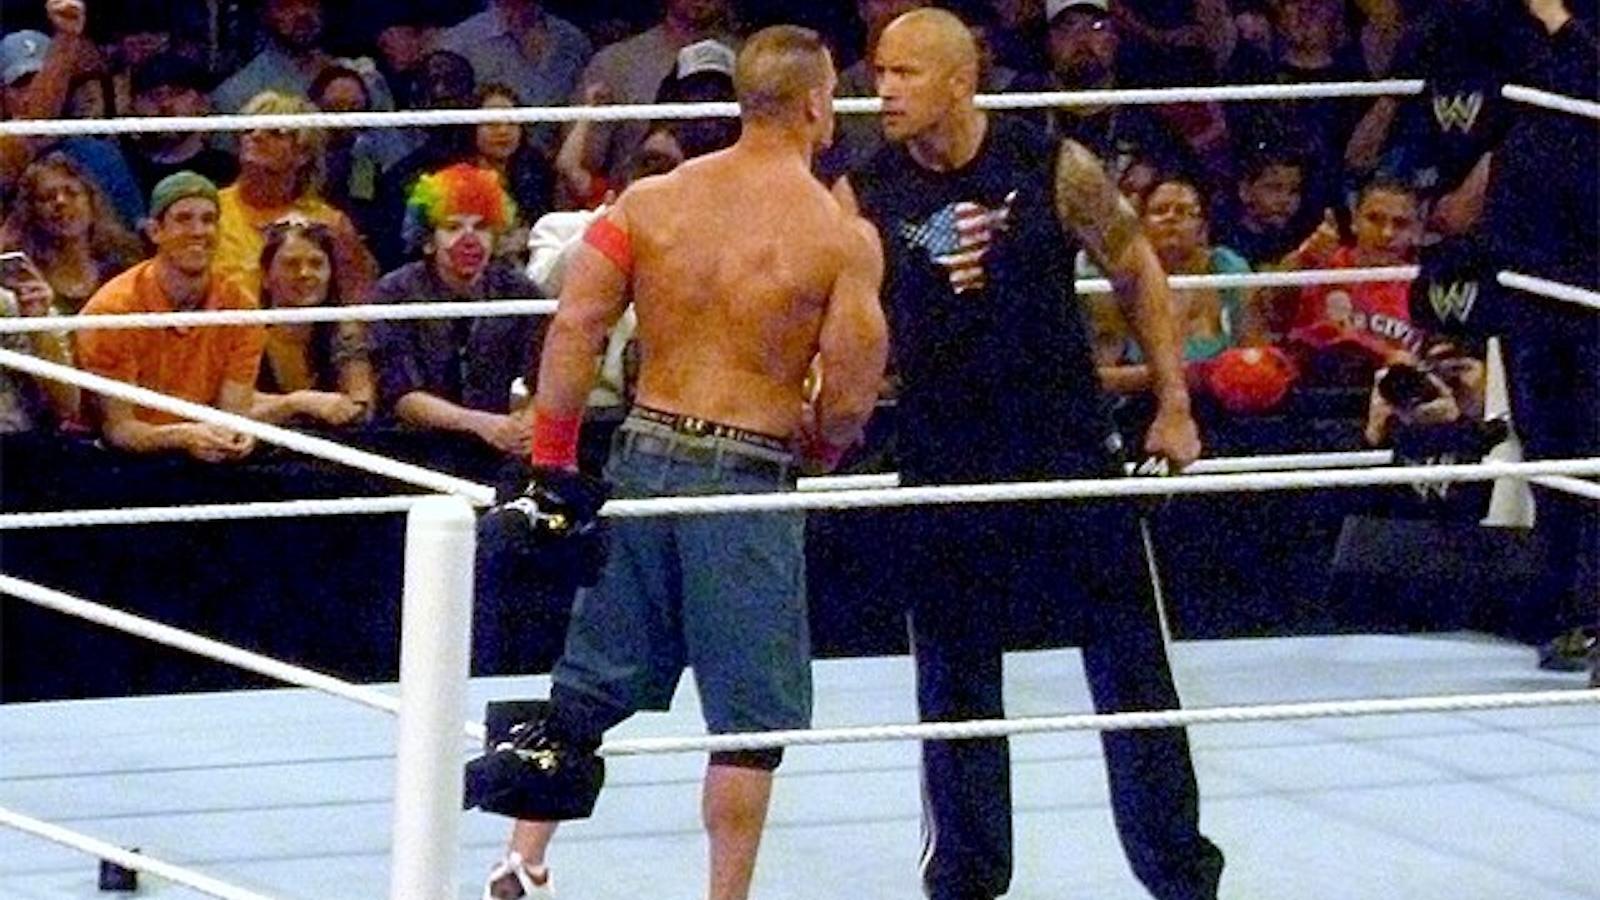 The Rock and John Cena agree to a match at WWE WrestleMania XXVIII